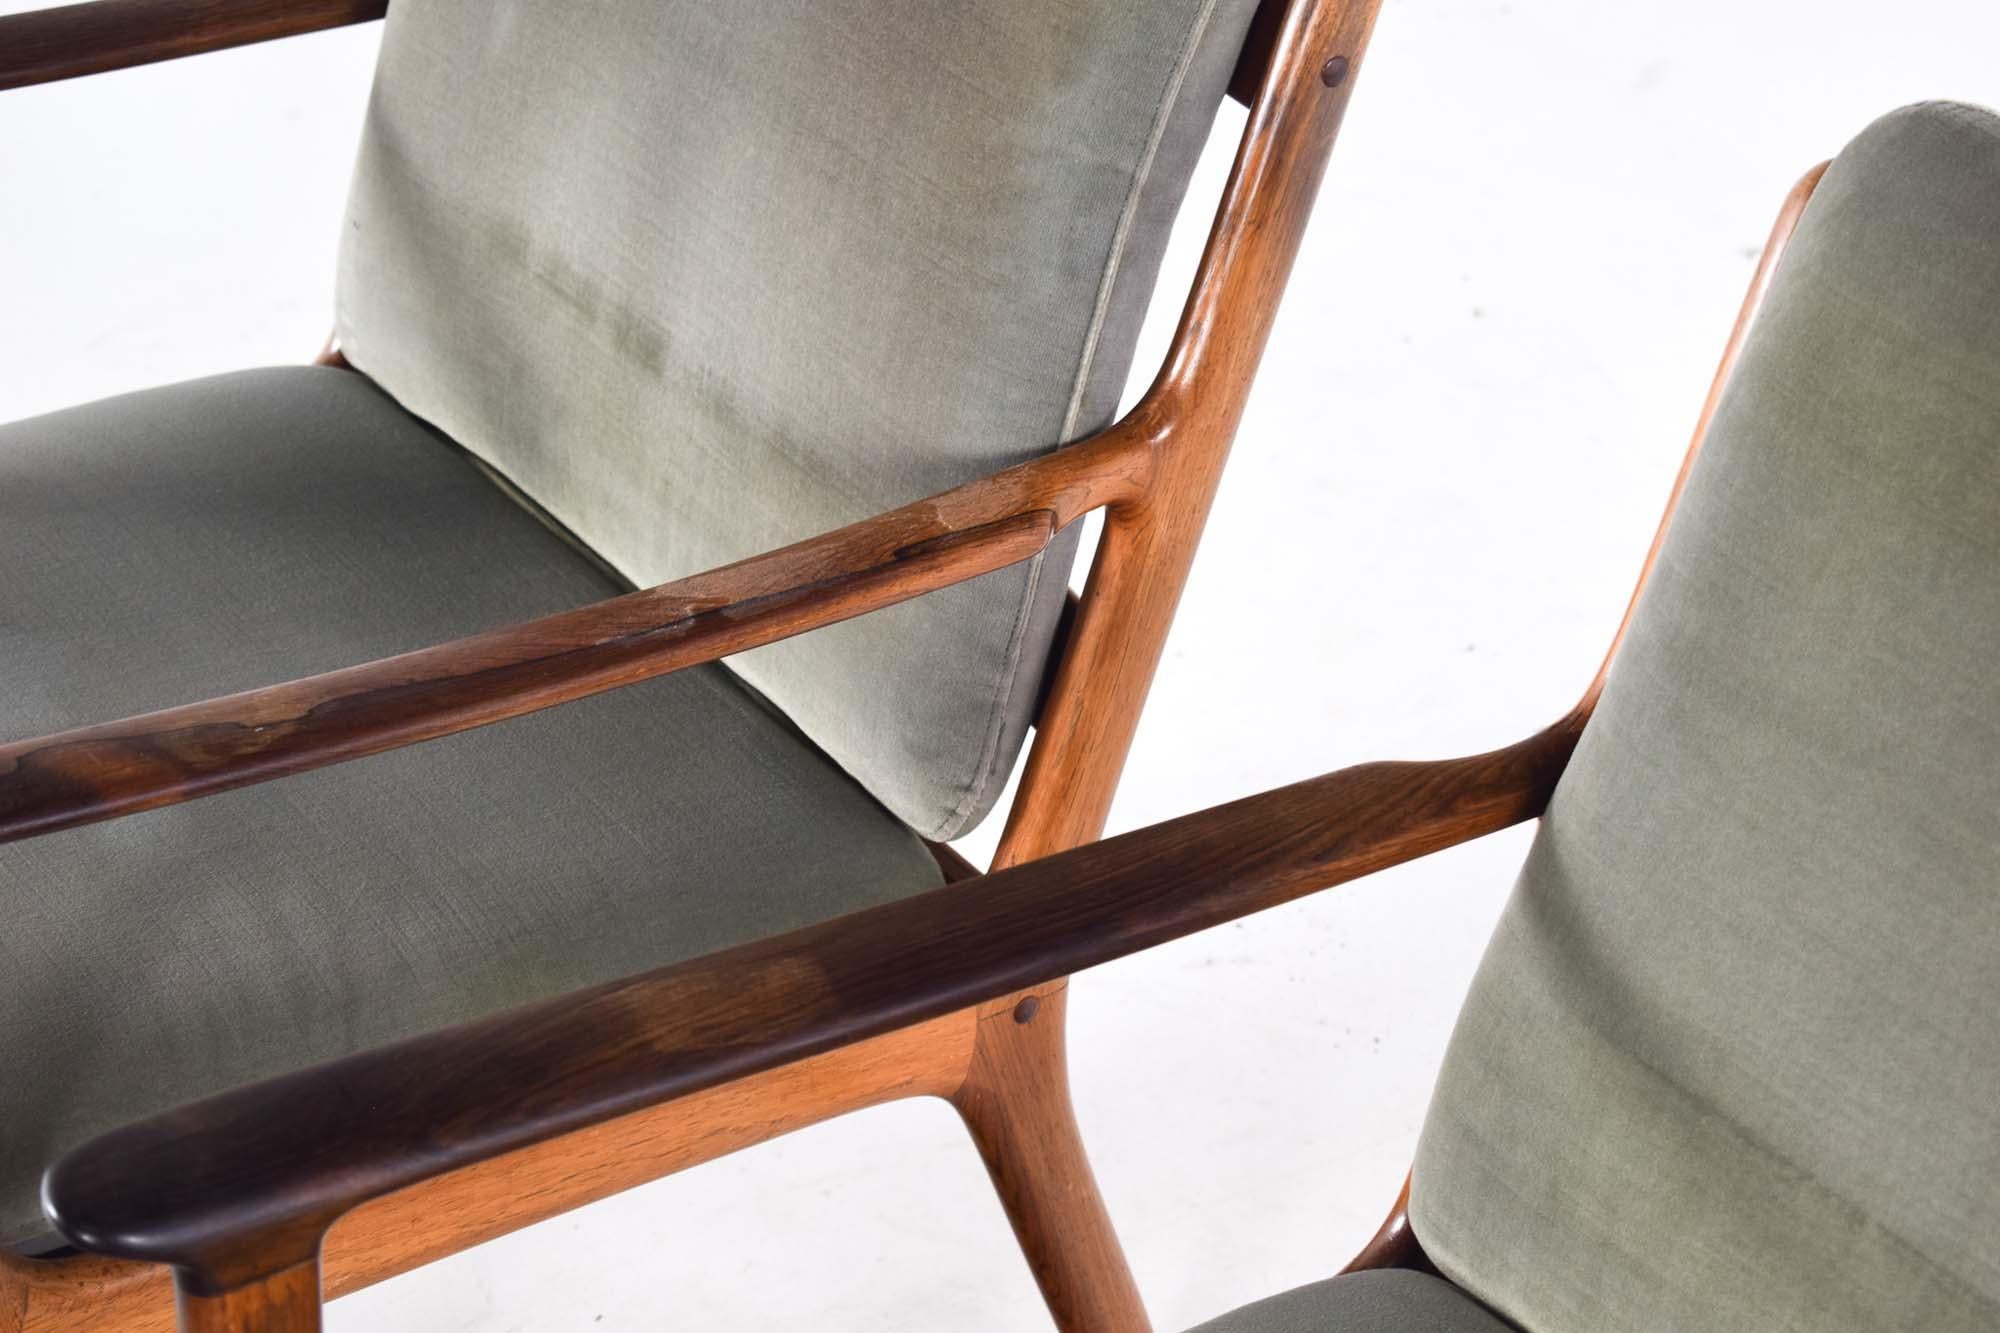 This exquisite pair of Mid-Century armchairs, designed by Ole Wanscher for Poul Jeppesen Møbelfabrik, model PJ112, are masterpieces of Danish design. Crafted from lustrous rosewood, these chairs showcase the wood's rich, deep hues and distinctive